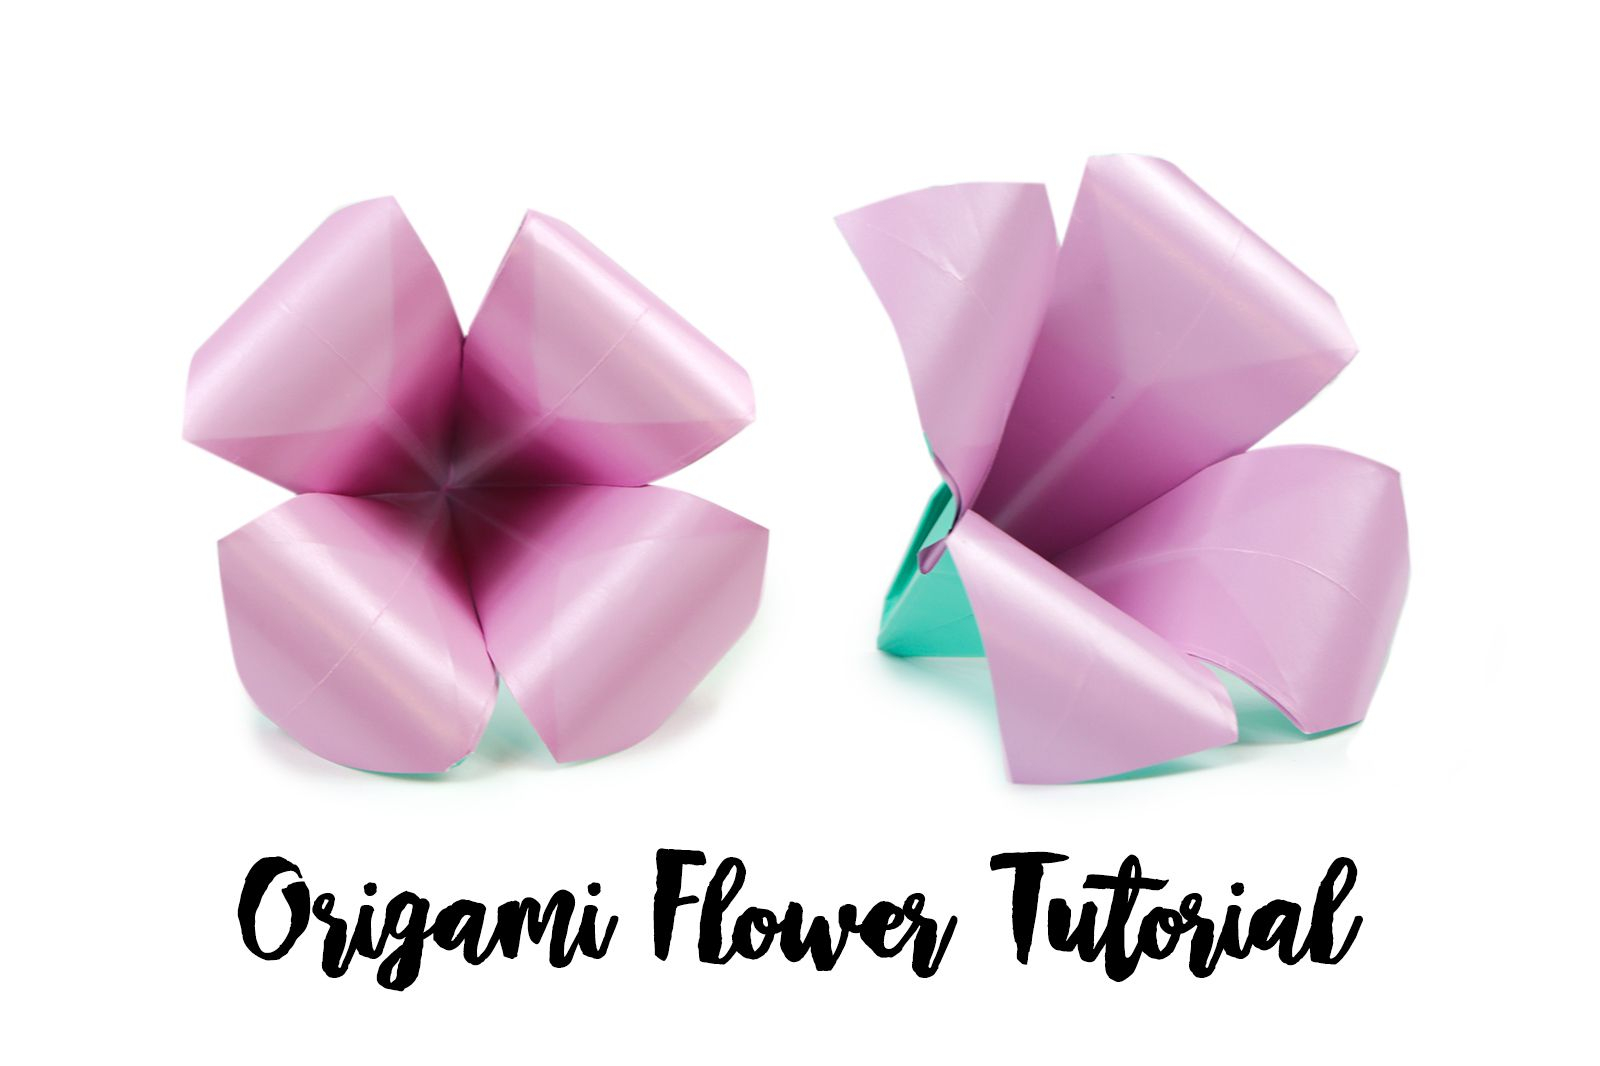 How To Make A Flower Origami Step By Step Make An Easy Origami Lily Flower